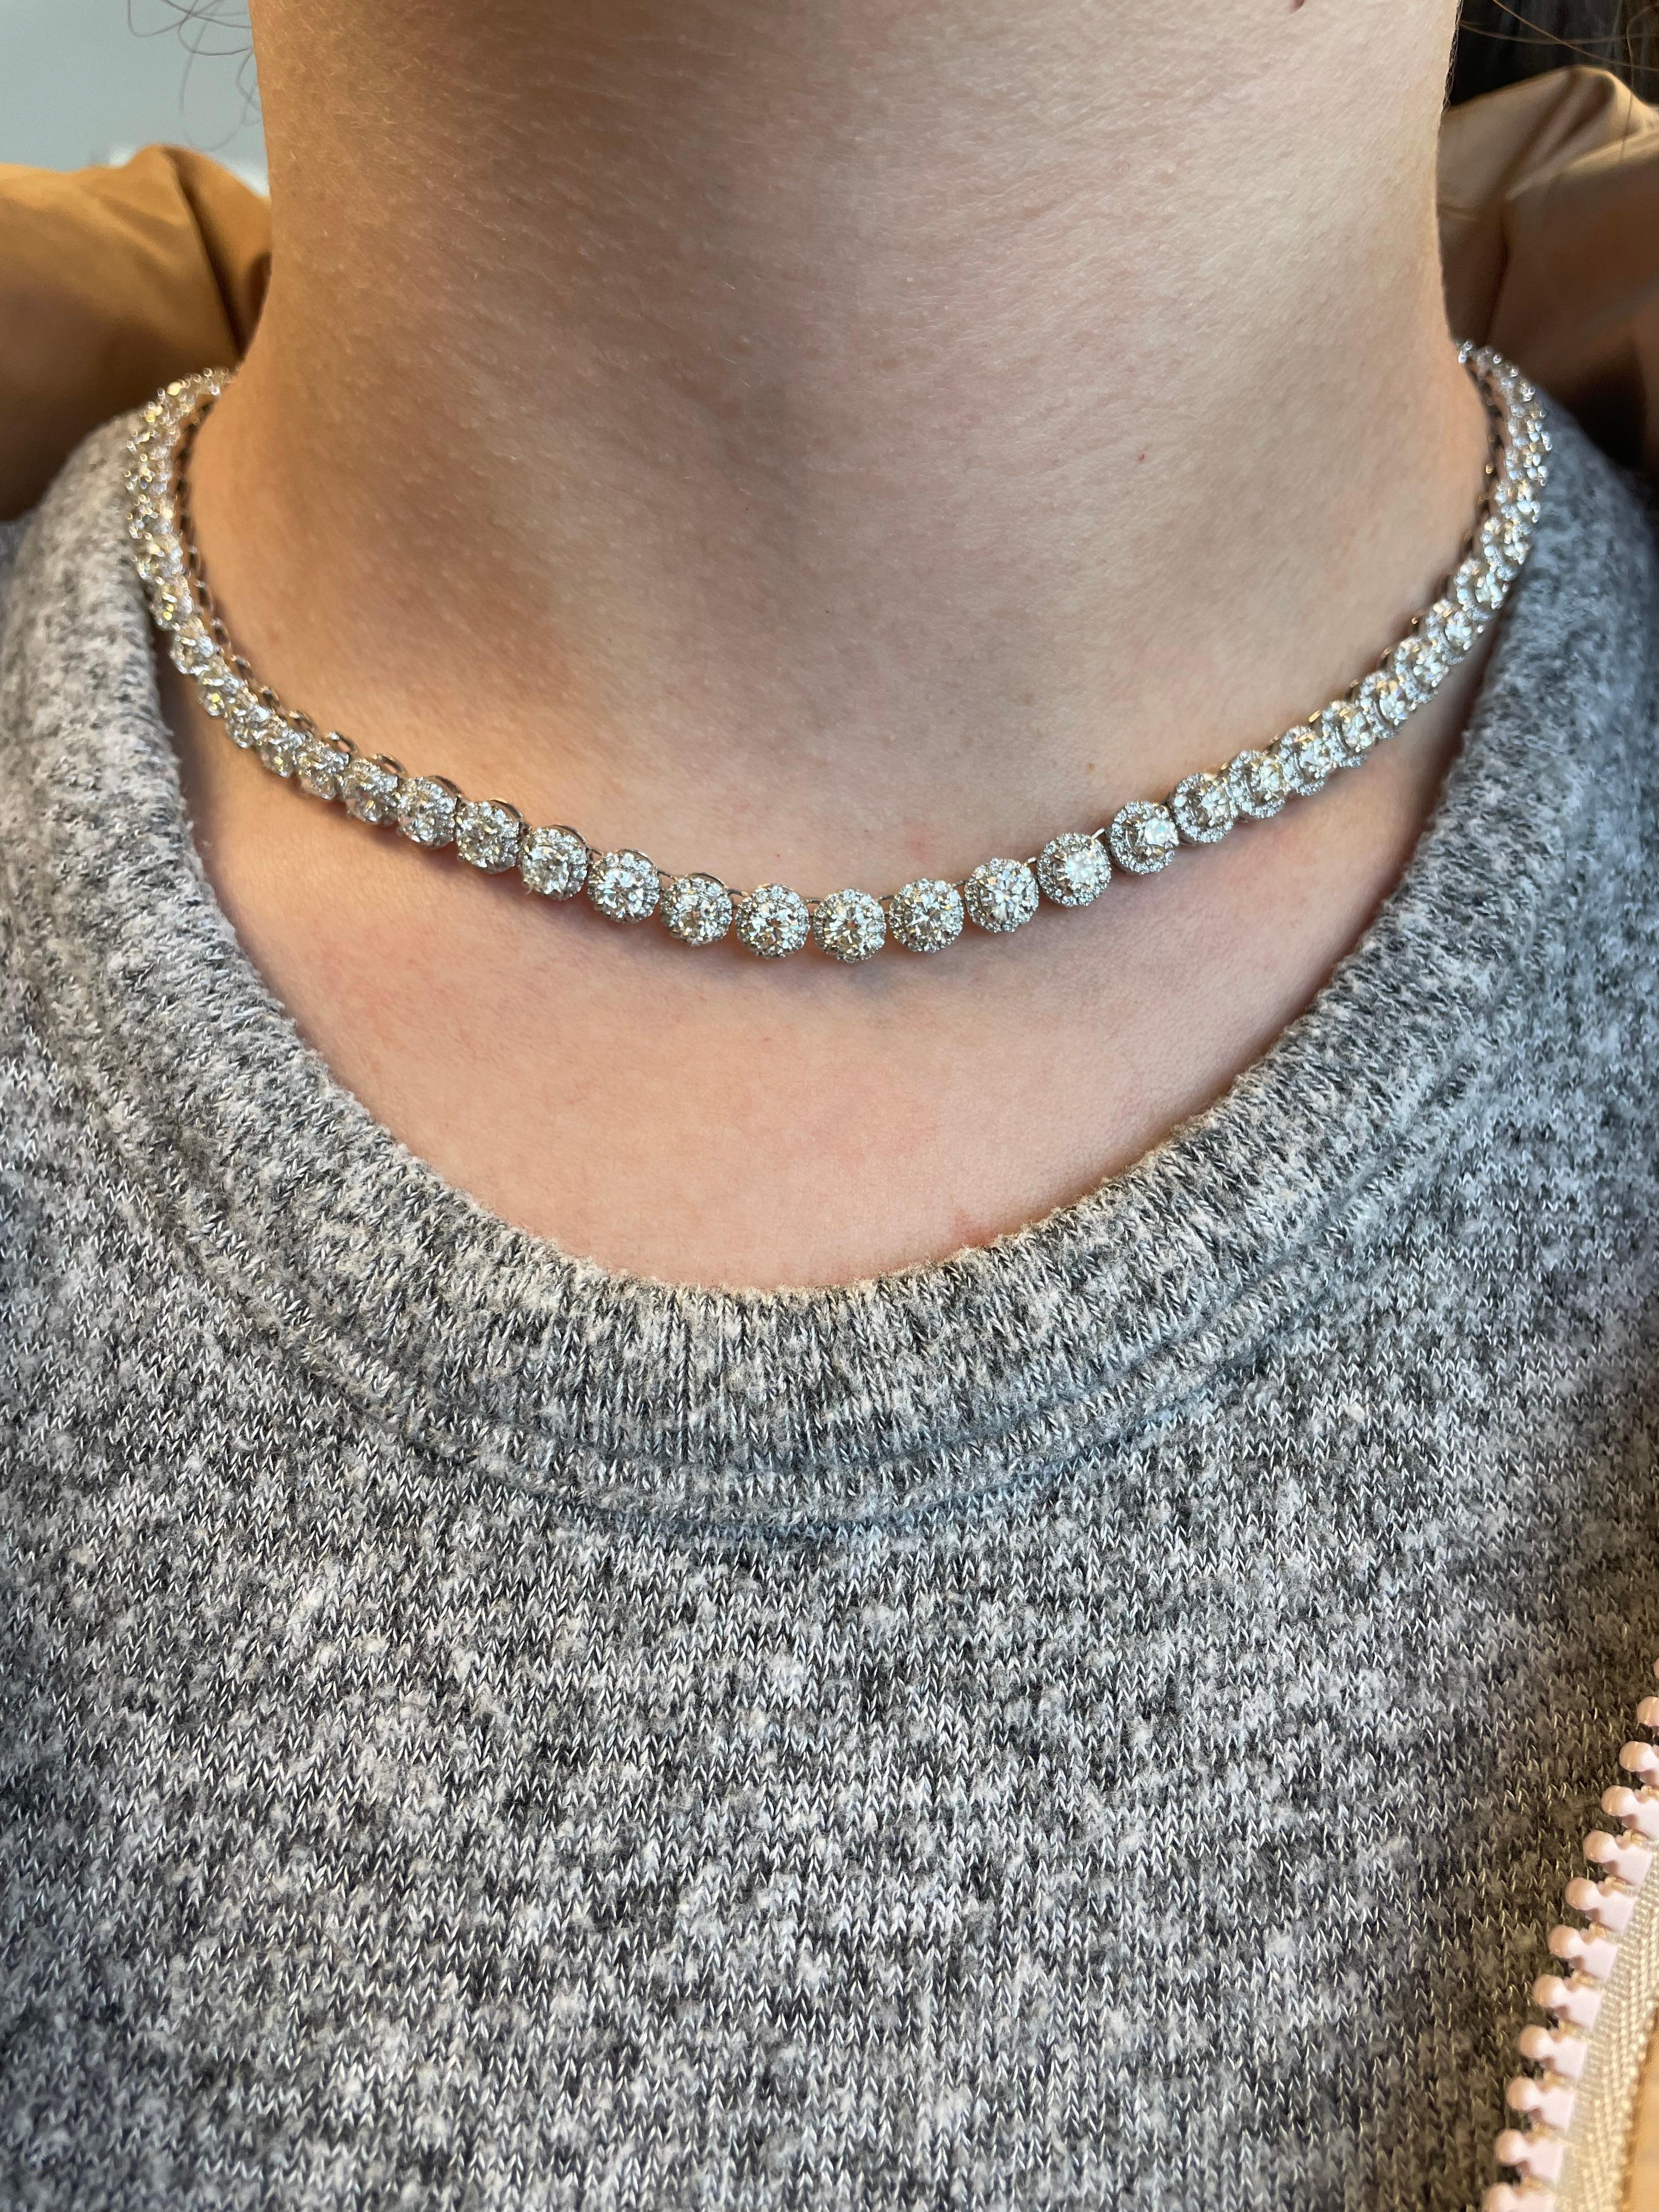 Exquisite and timeless diamonds tennis halo necklace. High jewelry by Alexander Beverly Hills.
67 center round brilliant diamonds 16.52ct complimented by a 4.89ct round diamond halo, 21.41 carats total. Approximately G/H color and SI clarity. Four